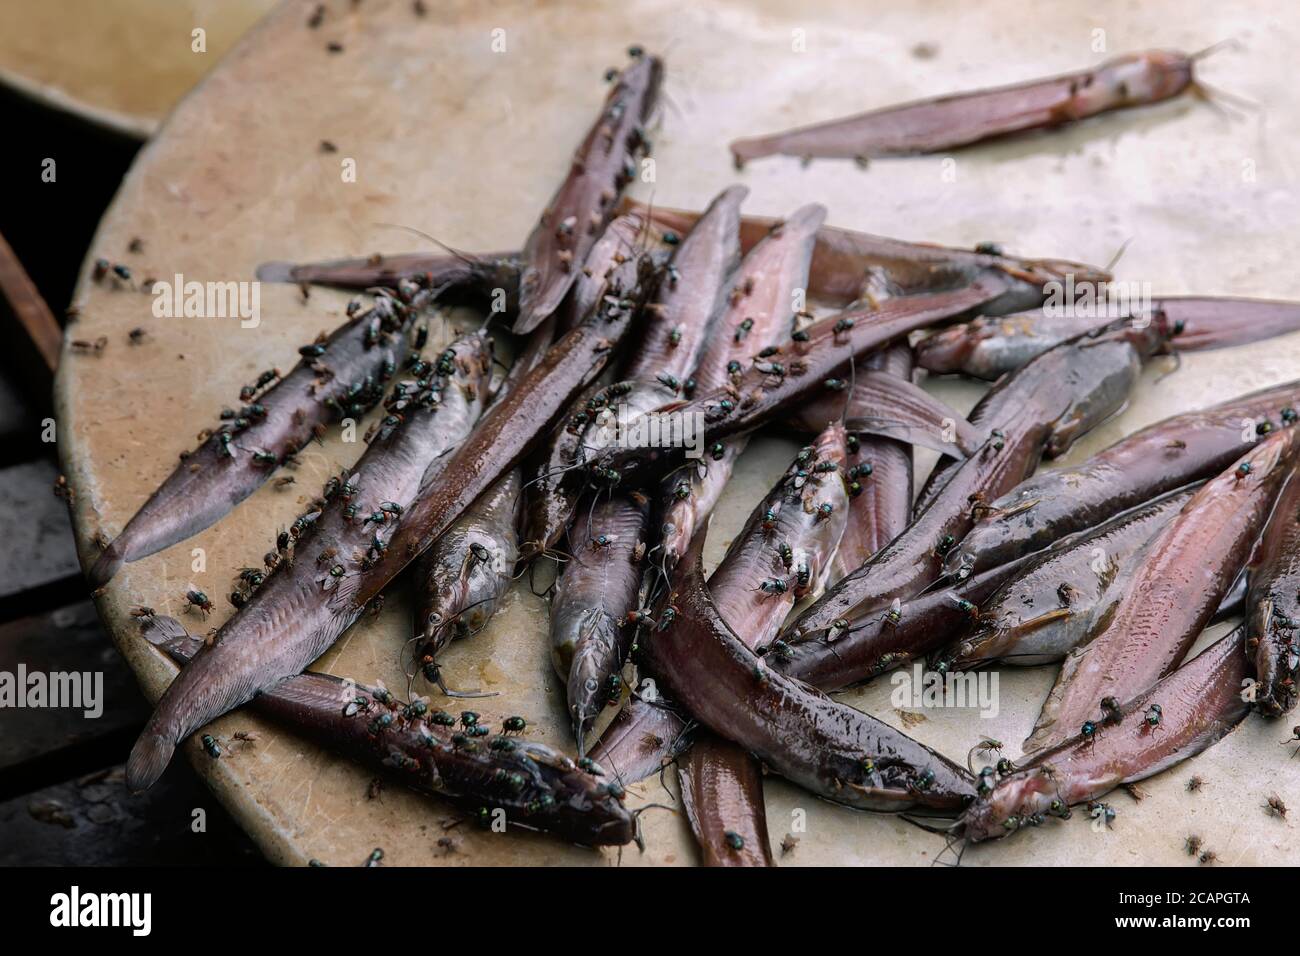 rotten catfish or fossil cat, Heteropneustes fossilis in fish market for sale Stock Photo